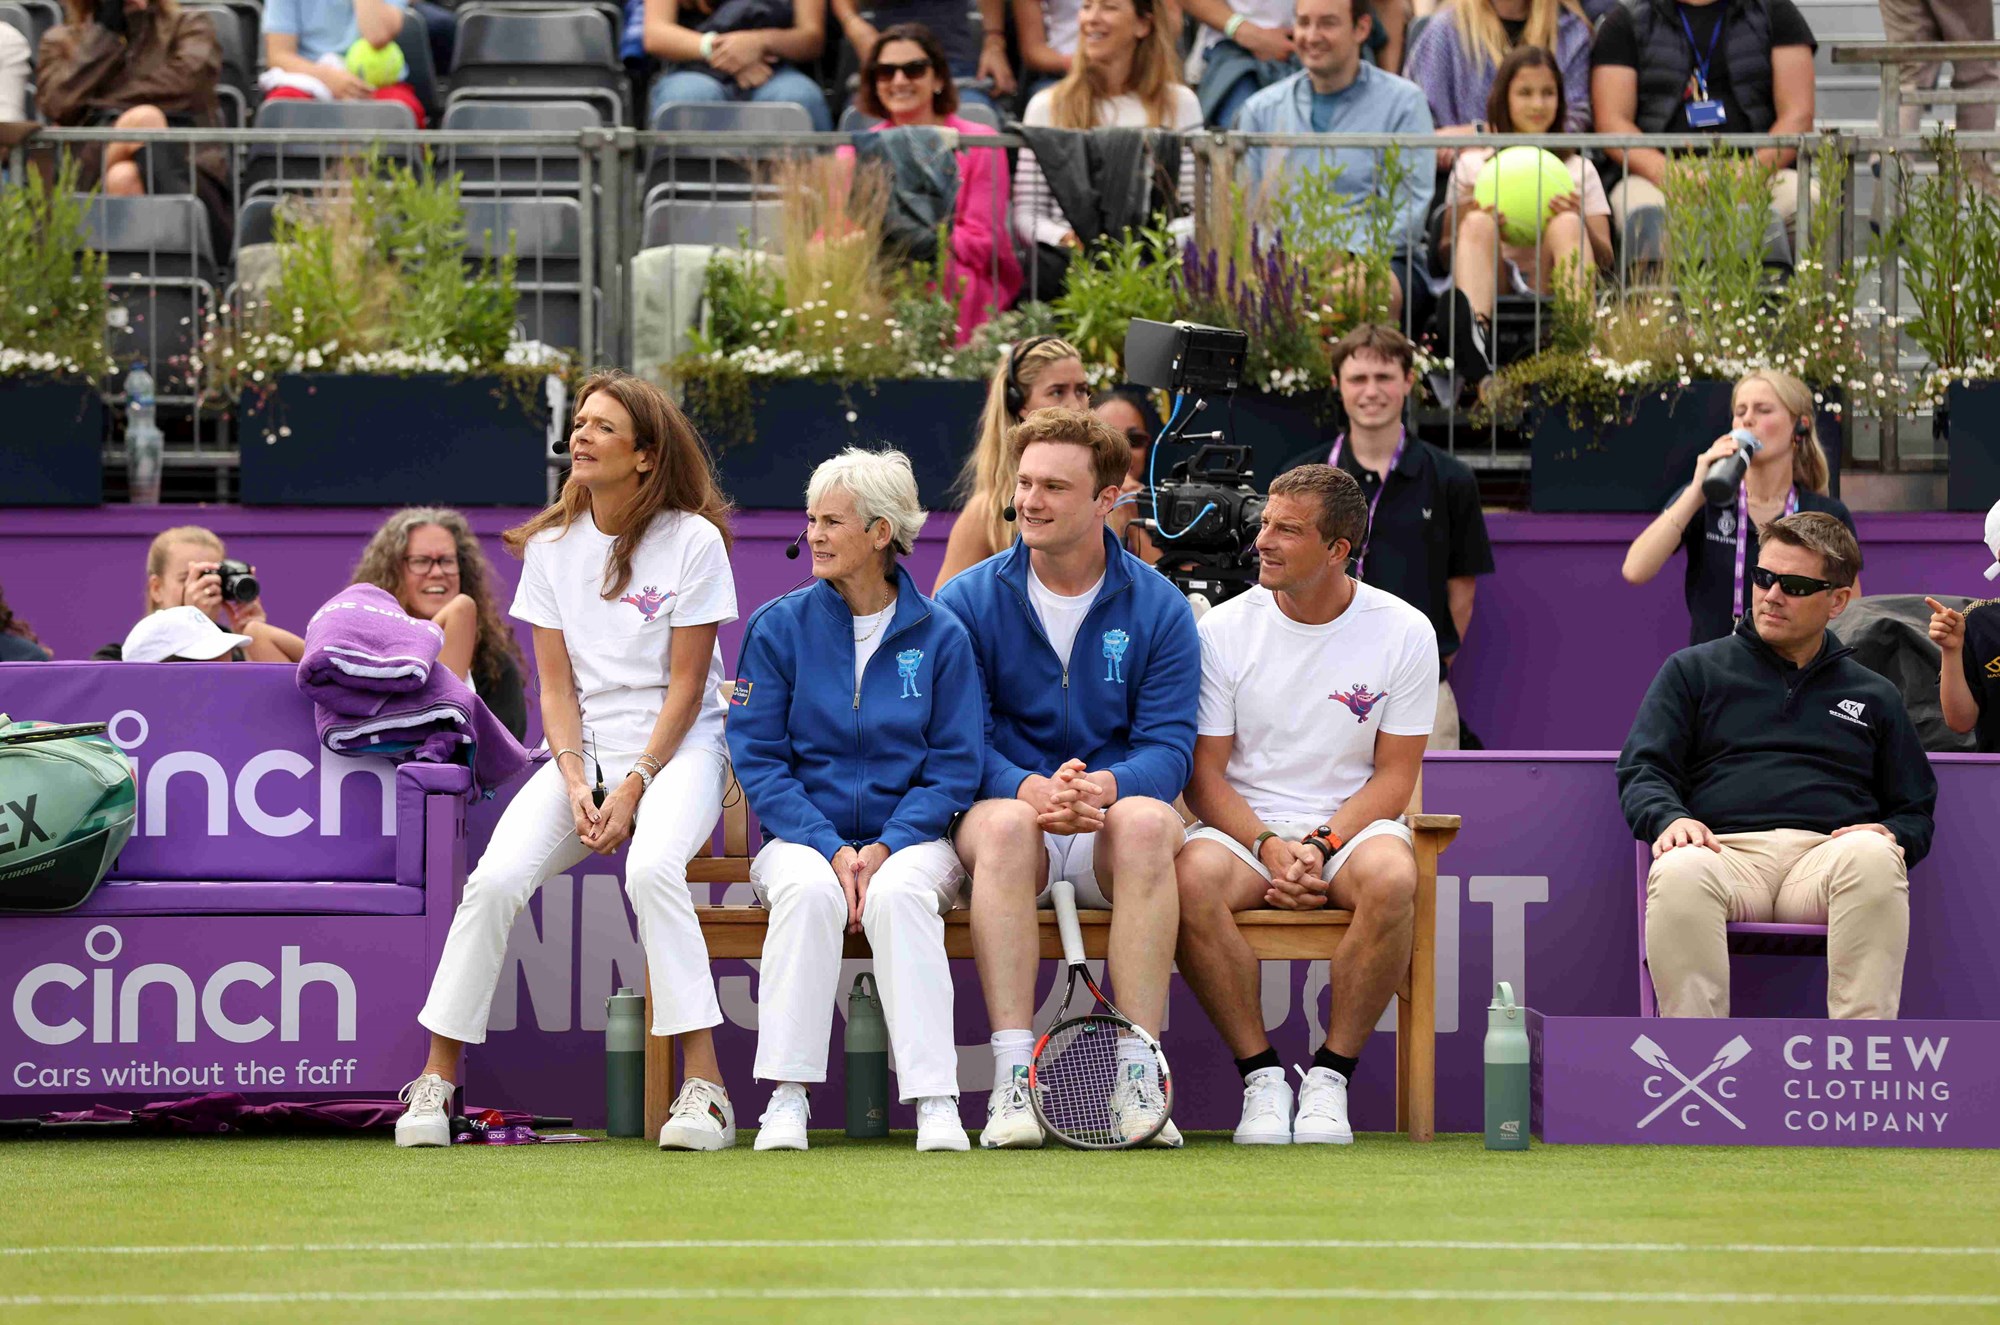 Annabel Croft, Judy Murray, Josh Berry and Bear Grylls sat on a cinch Championships chair while looking over a tennis court at the cinch Championships fan day exhibition matches